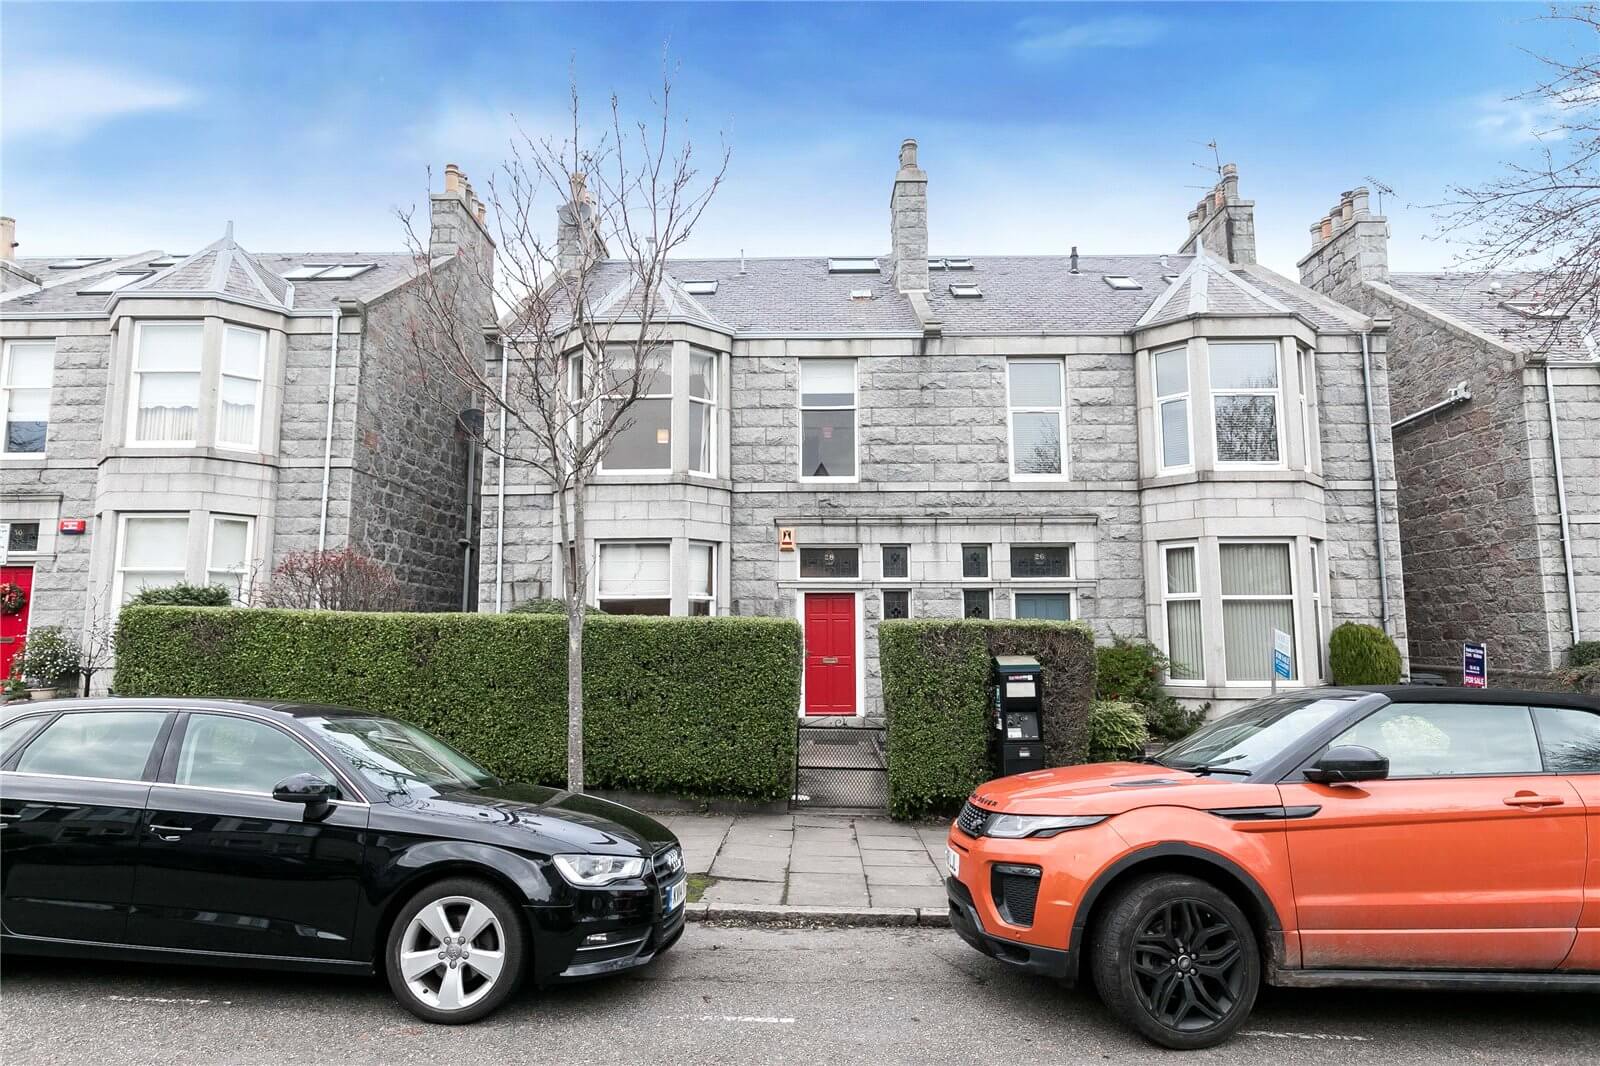 Our latest properties for sale and to let (21st January 2020)